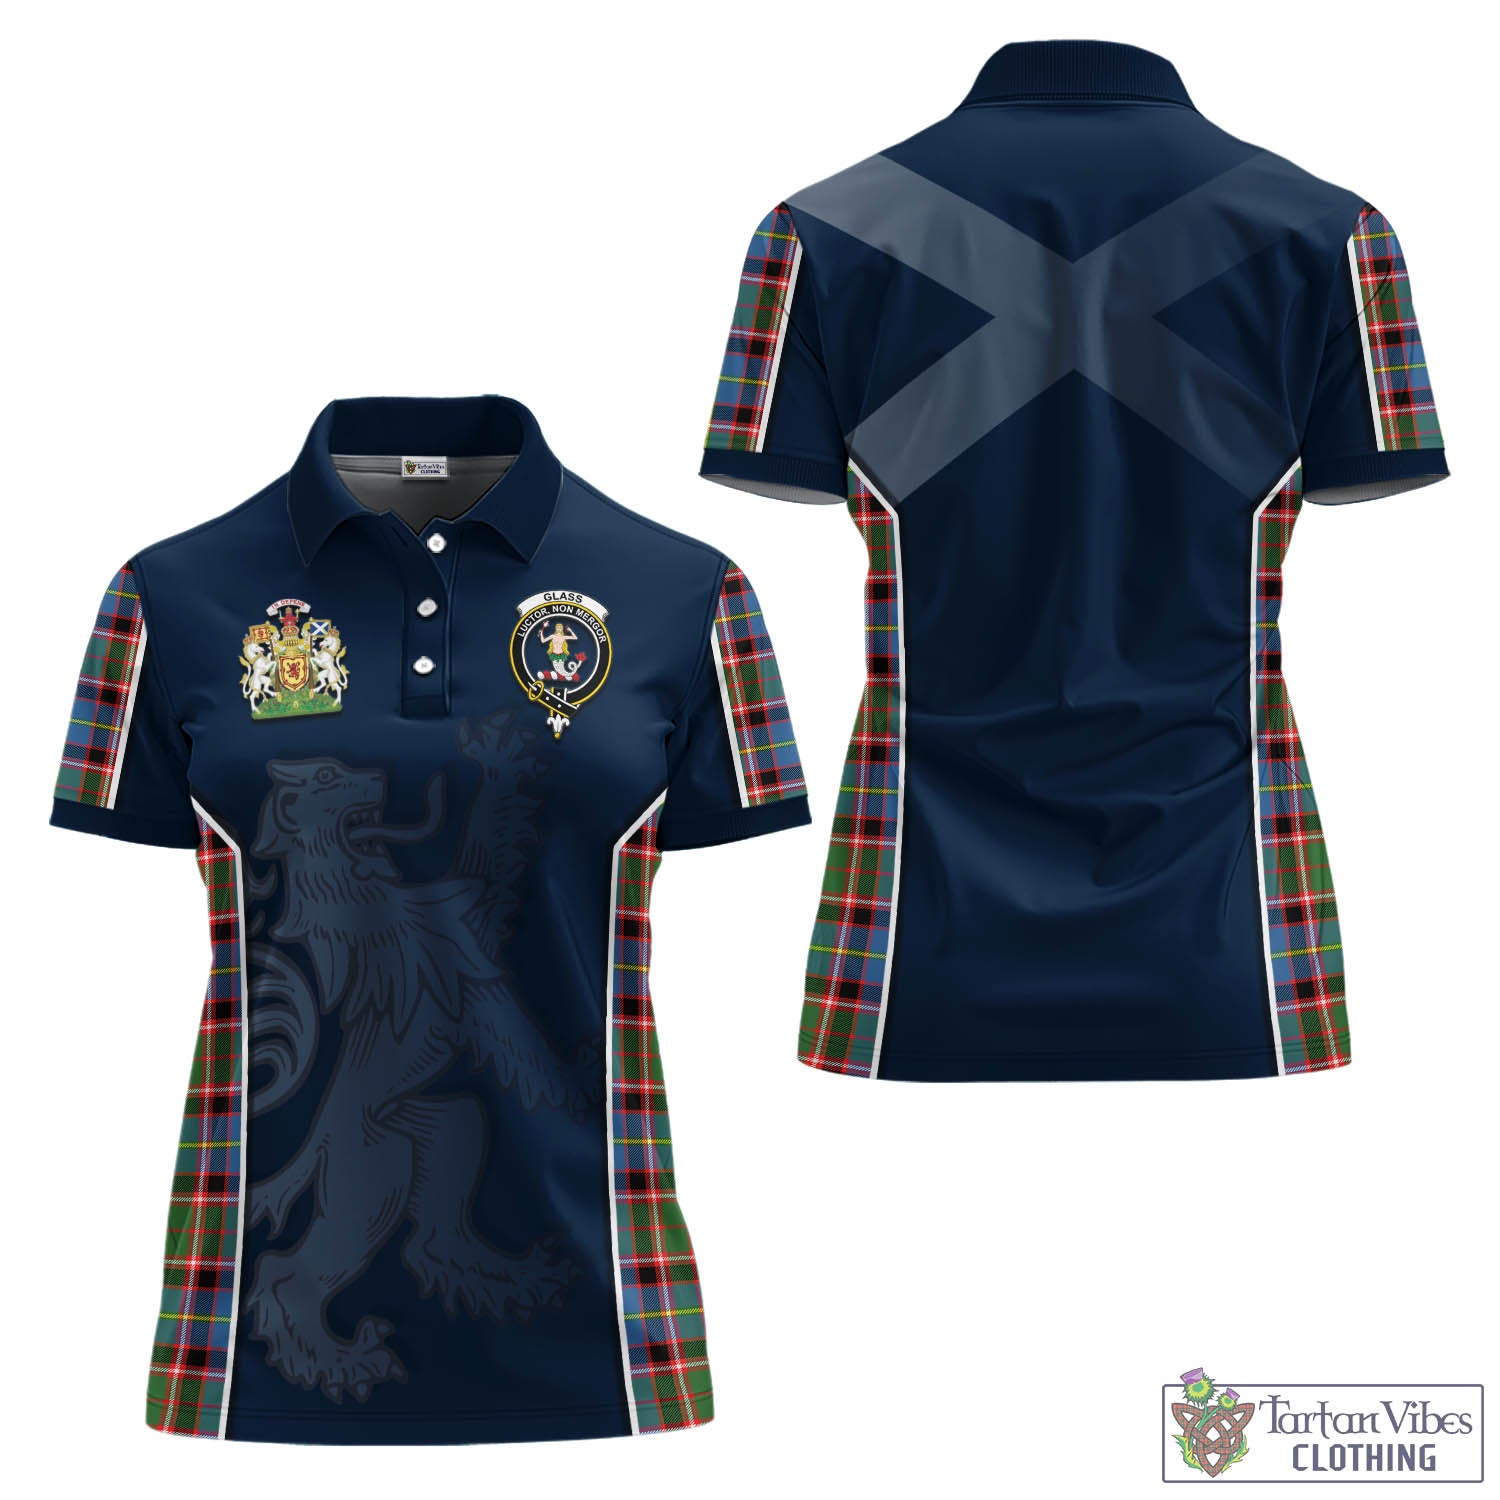 Tartan Vibes Clothing Glass Tartan Women's Polo Shirt with Family Crest and Lion Rampant Vibes Sport Style